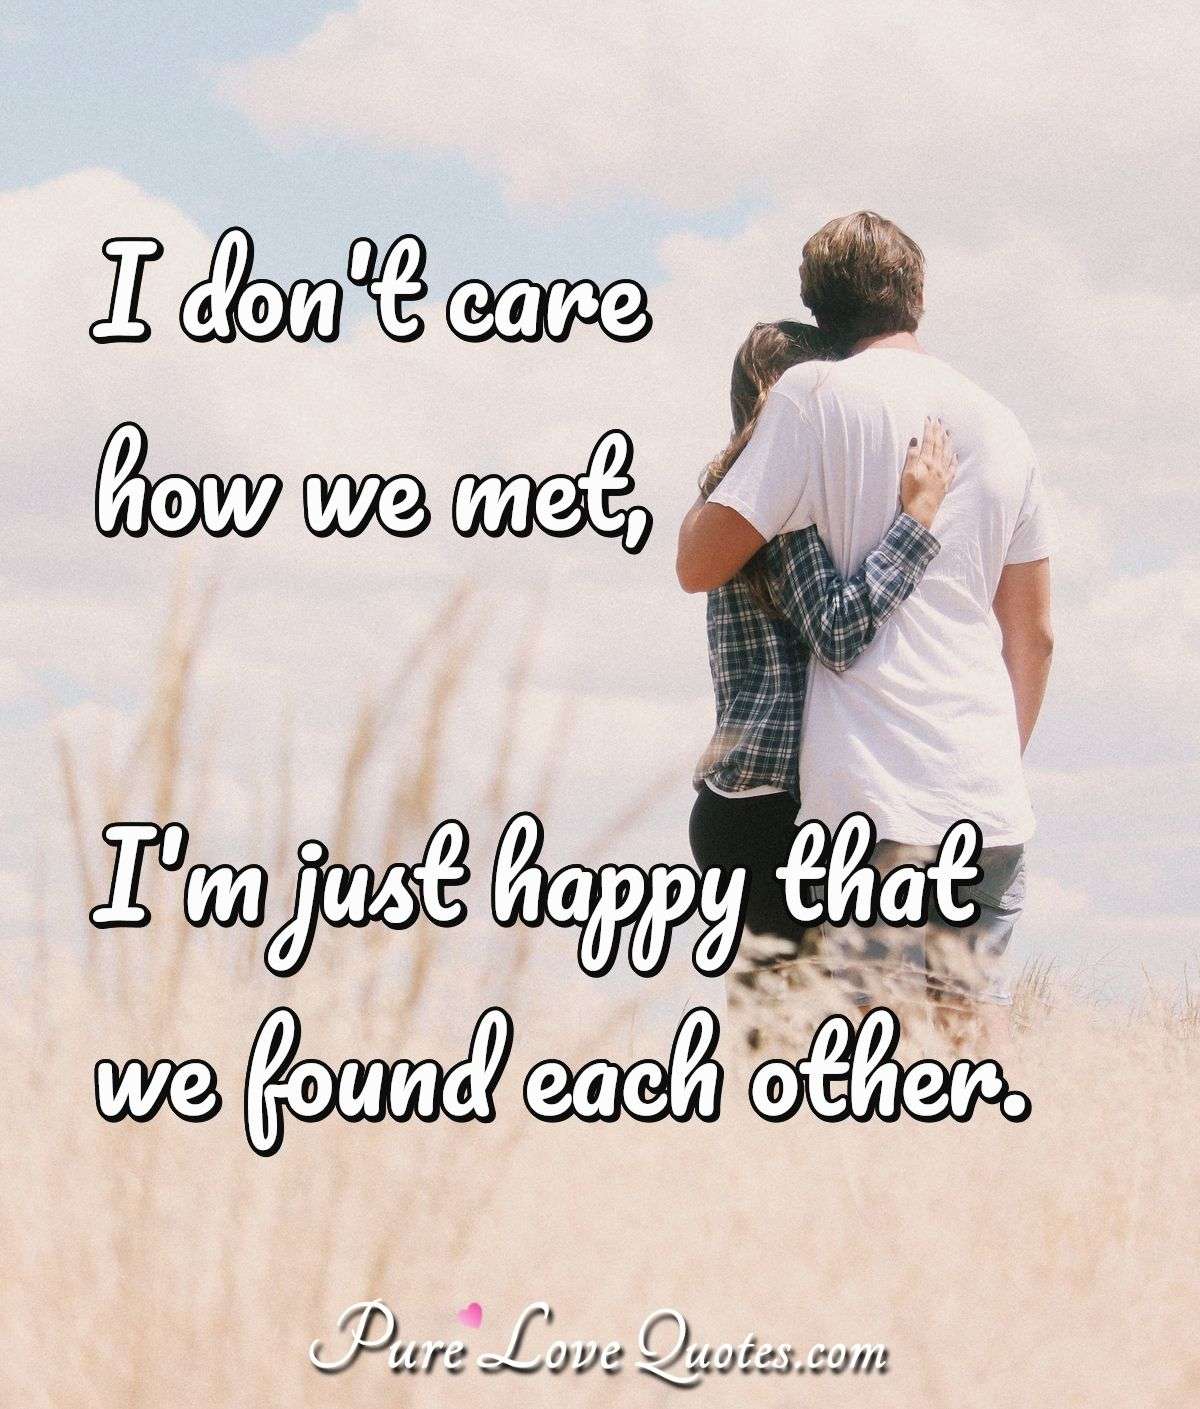 I don't care how we met, I'm just happy that we found each other. - Anonymous